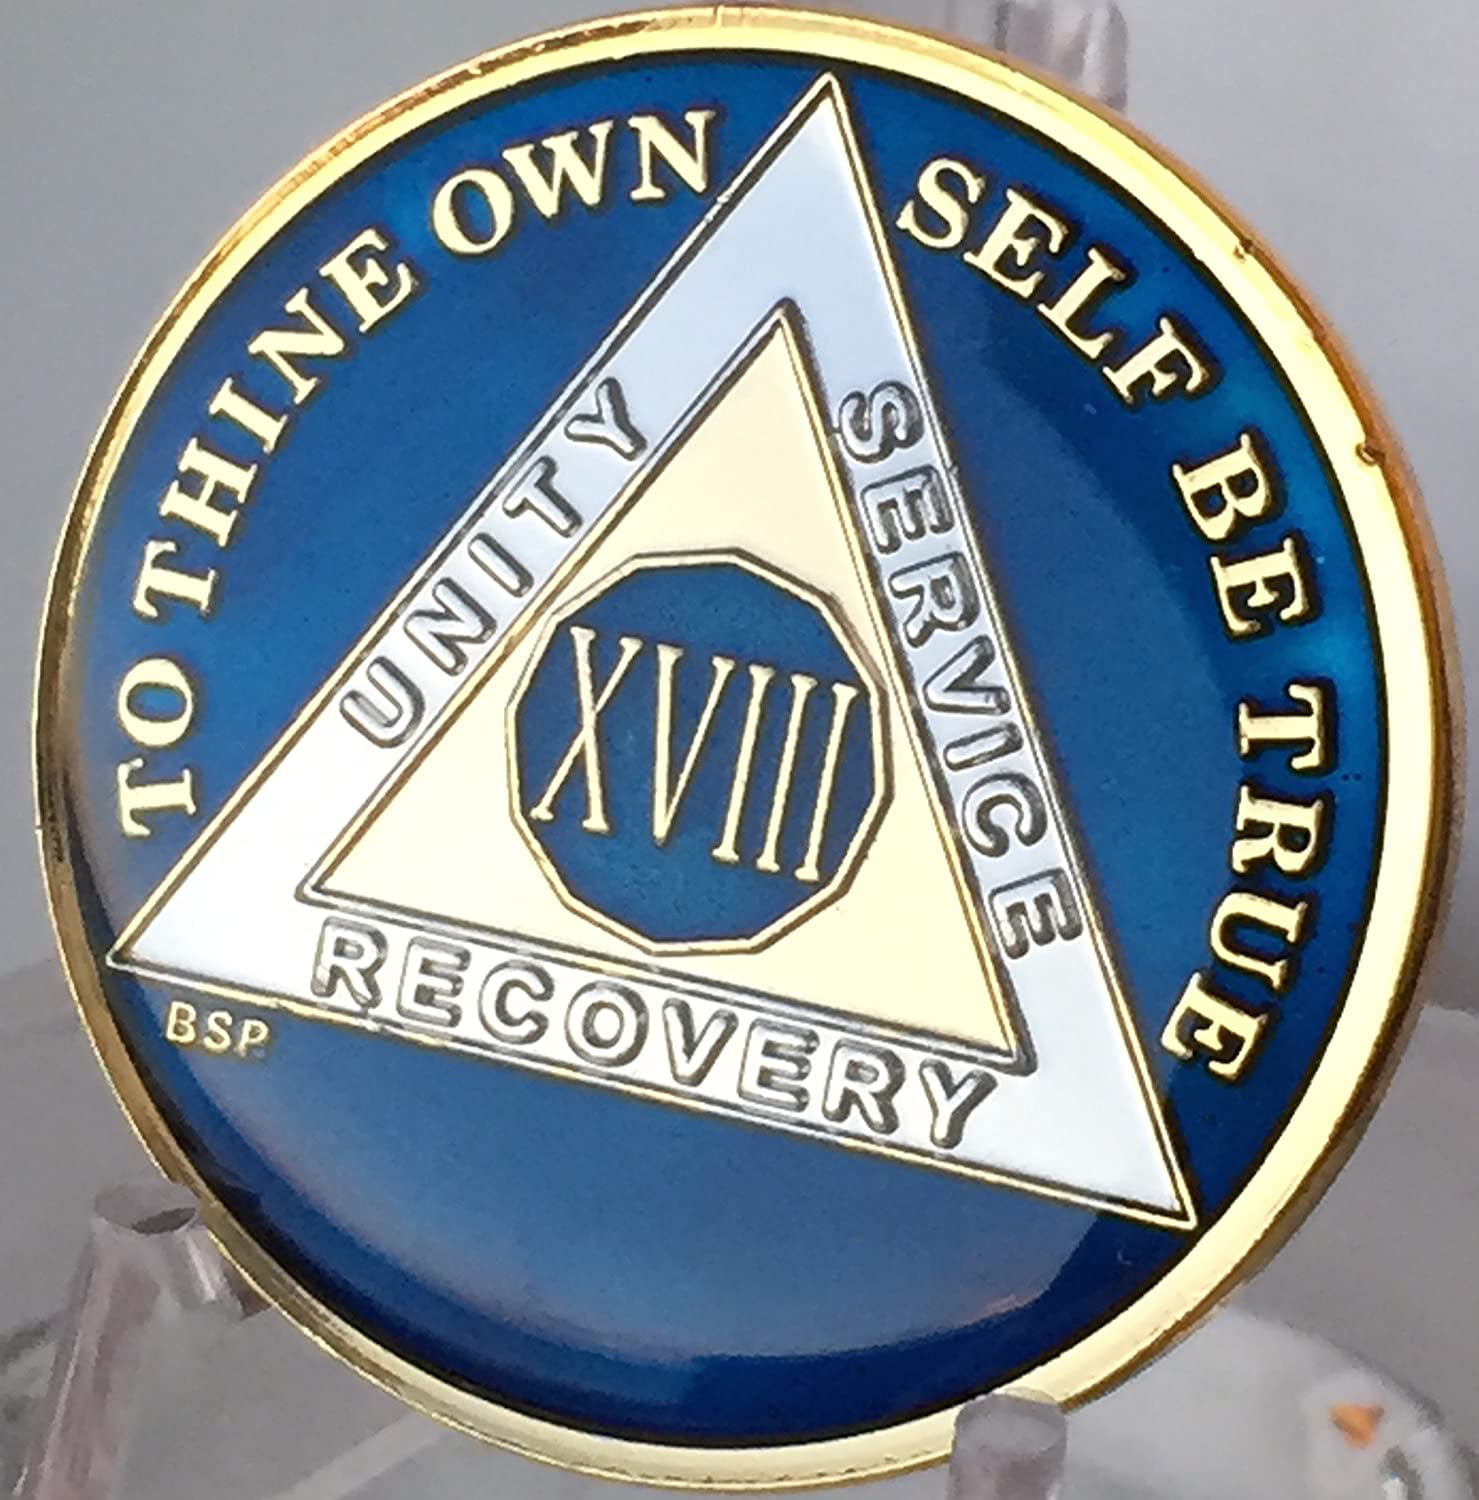 7 Year Midnight Blue AA Alcoholics Anonymous Medallion Chip Tri Plate Gold & Nickel Plated Serenity Prayer 